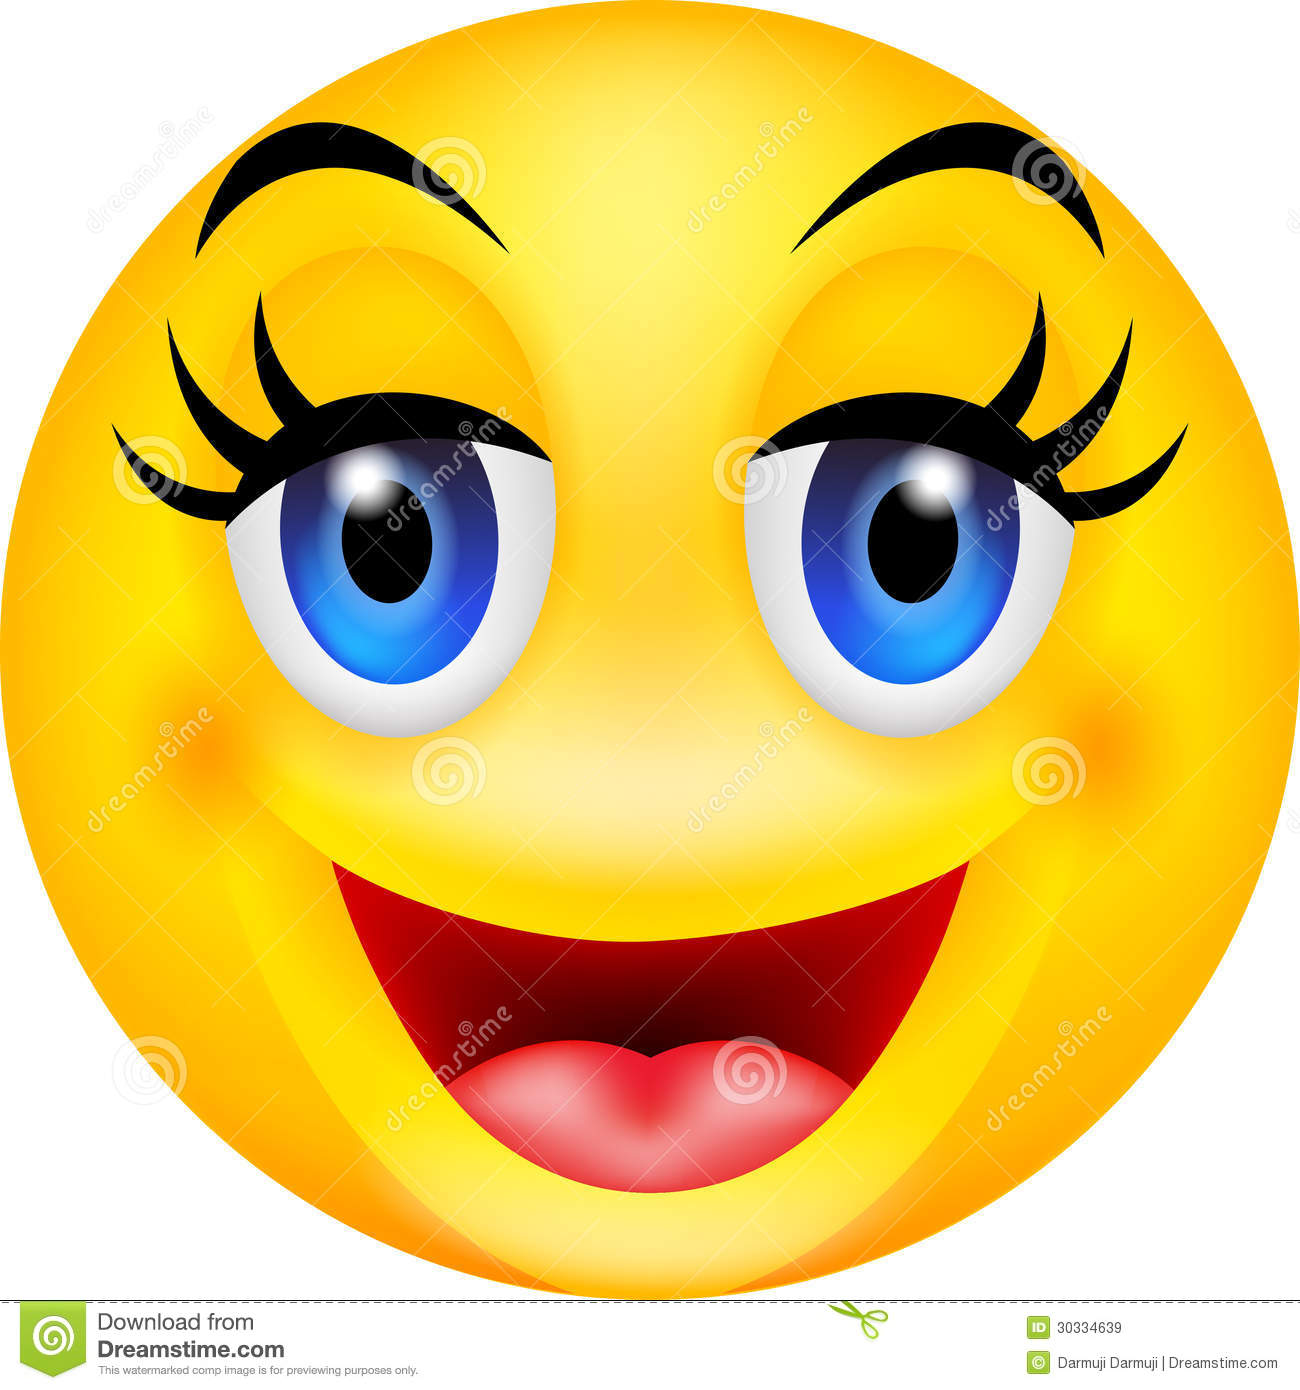 clip art silly smile - photo #9